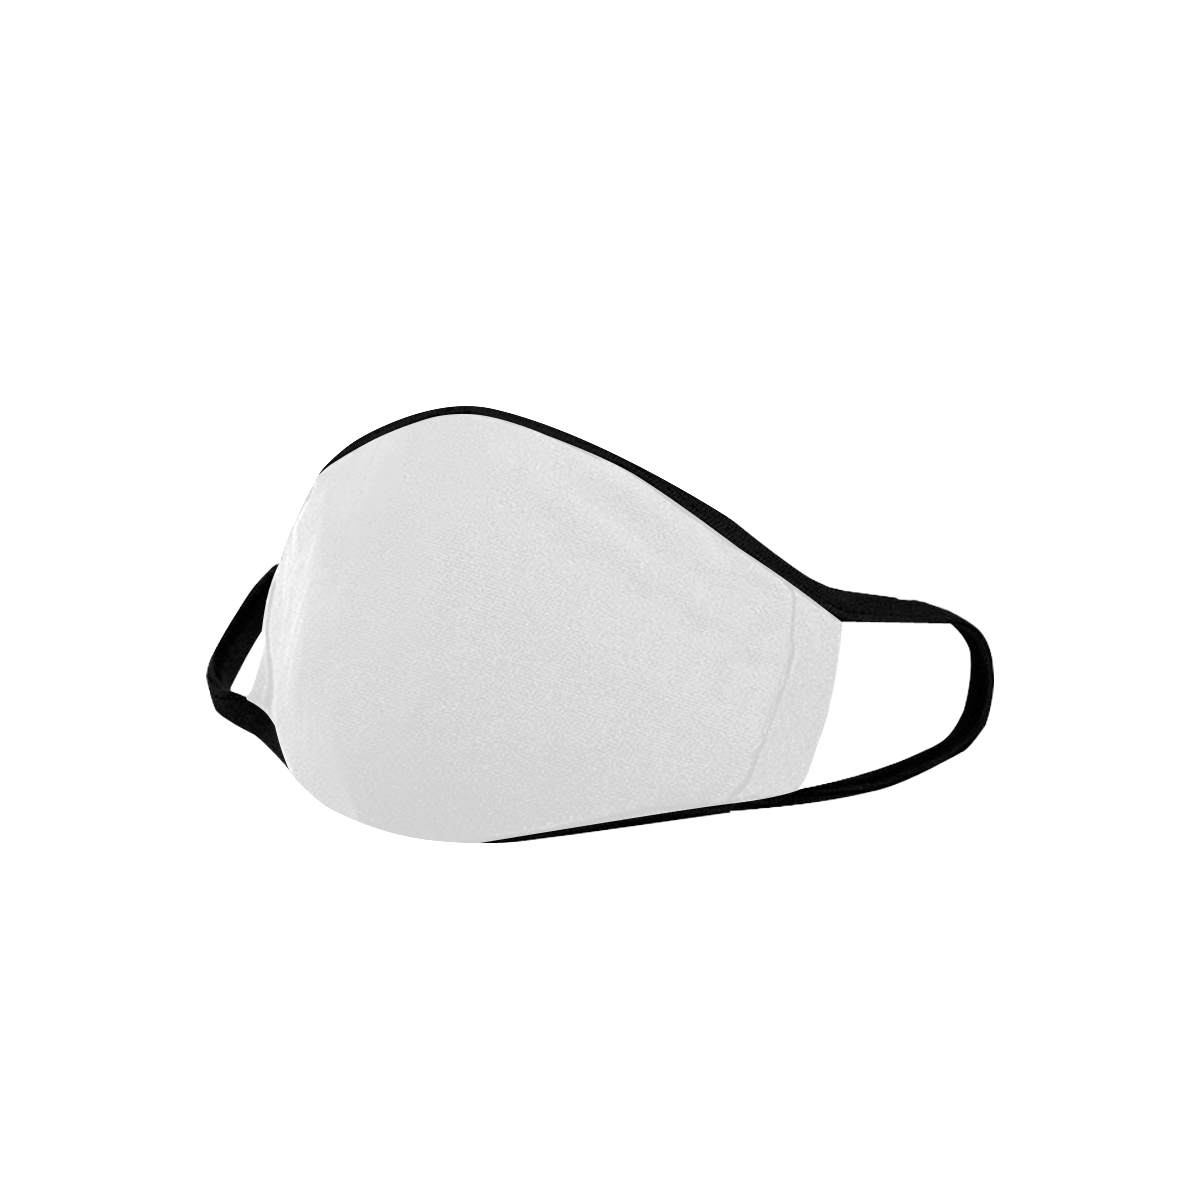 Mouth Mask (60 Filters Included) (Non-medical Products)